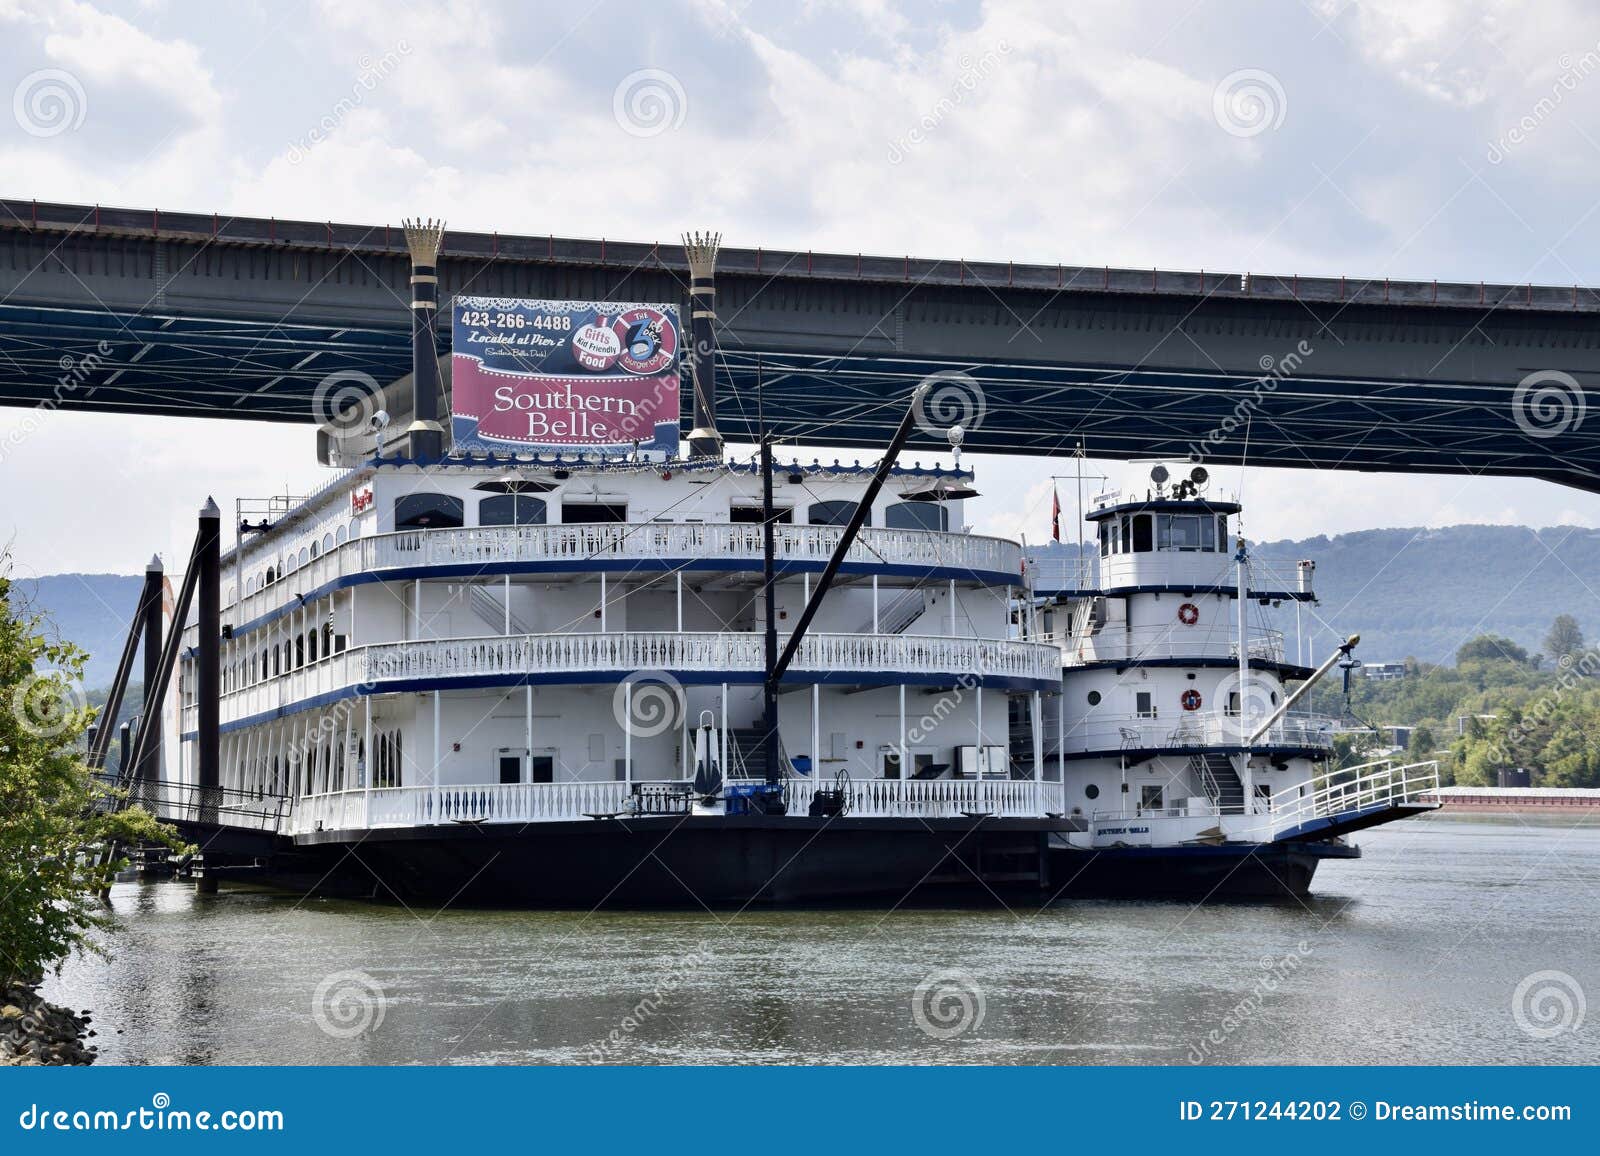 southern belle riverboat chattanooga tennessee